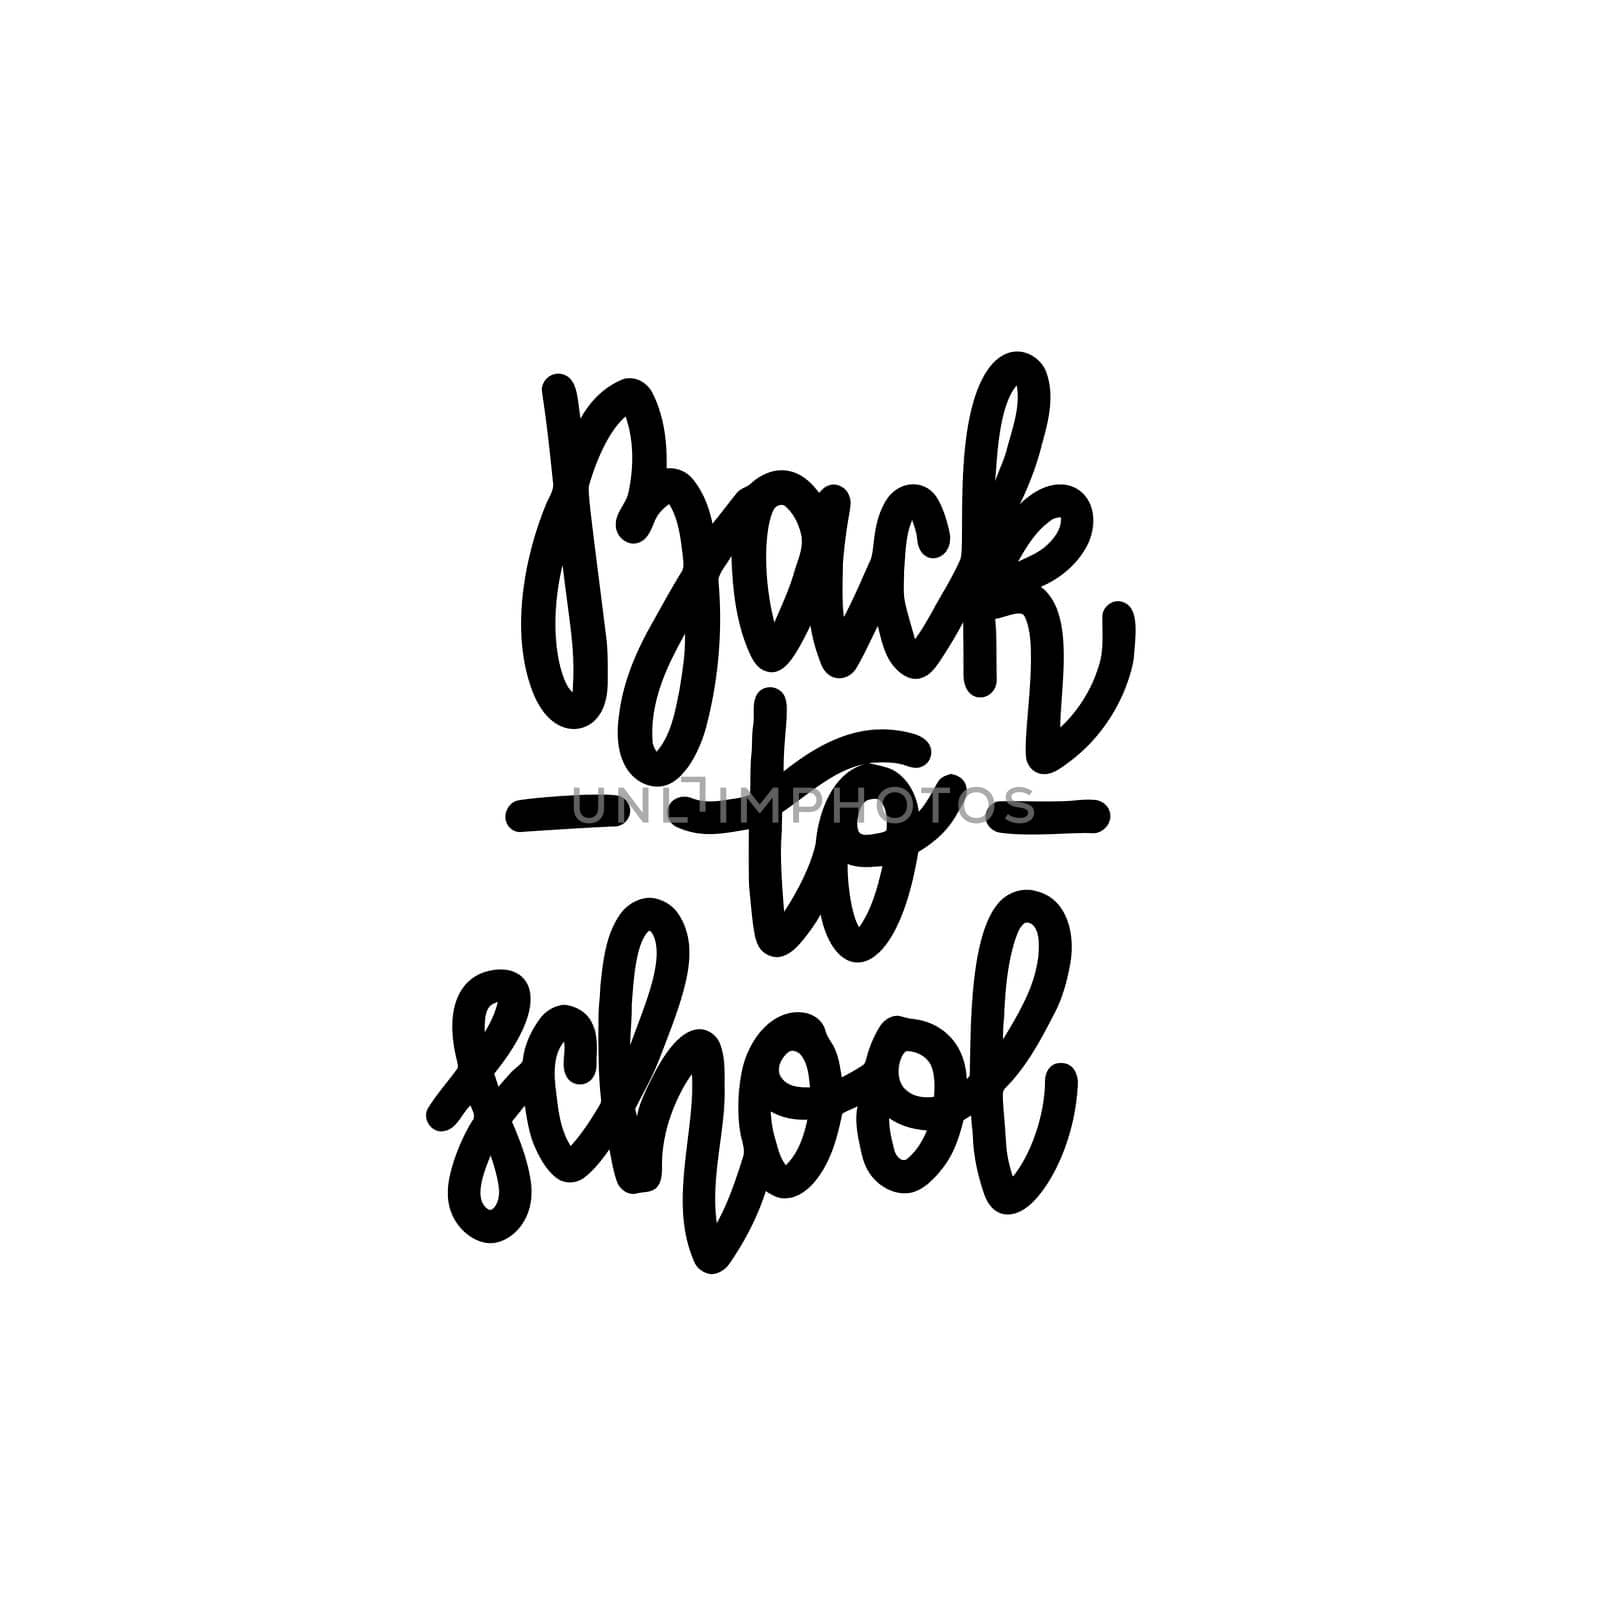 Back to school. Handwritten lettering isolated on white background. illustration for posters, cards and much more.